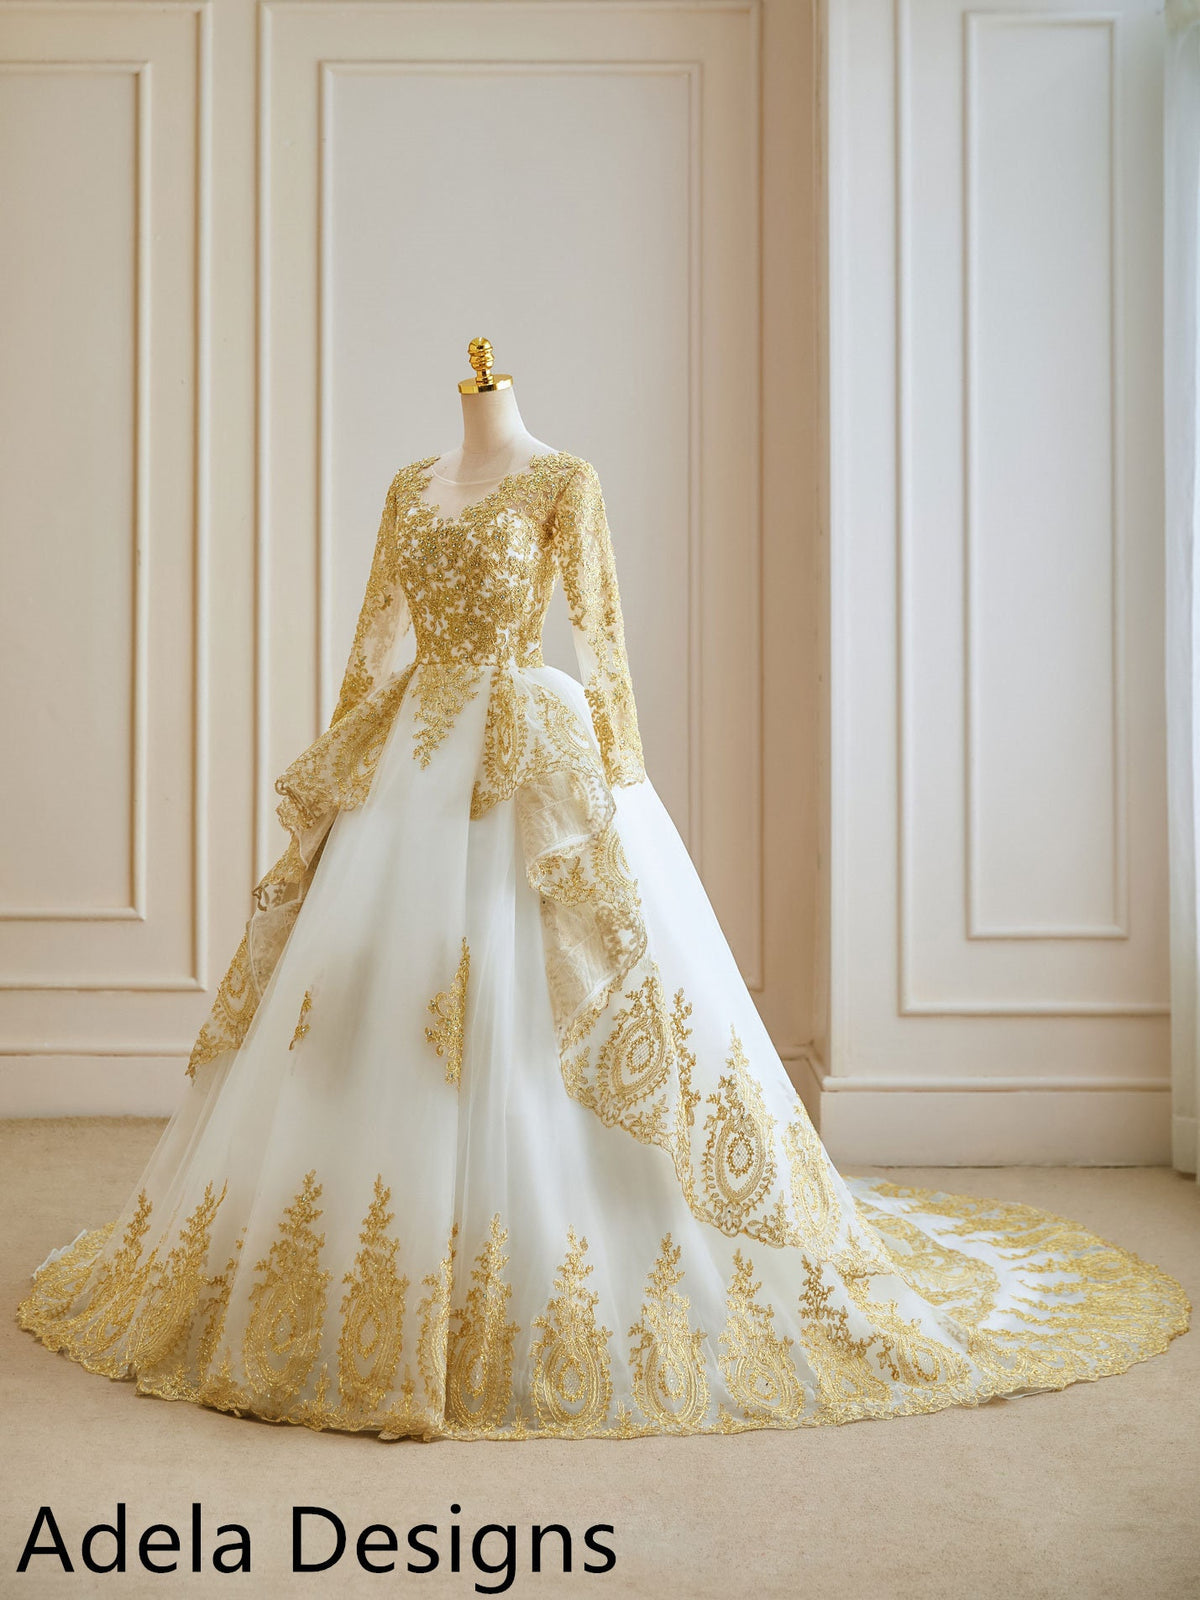 Untraditional Gold and White Ball Gown Royal Wedding Dress Bridal Illusion V Neck Long Sleeves Lace with Train Unique Design